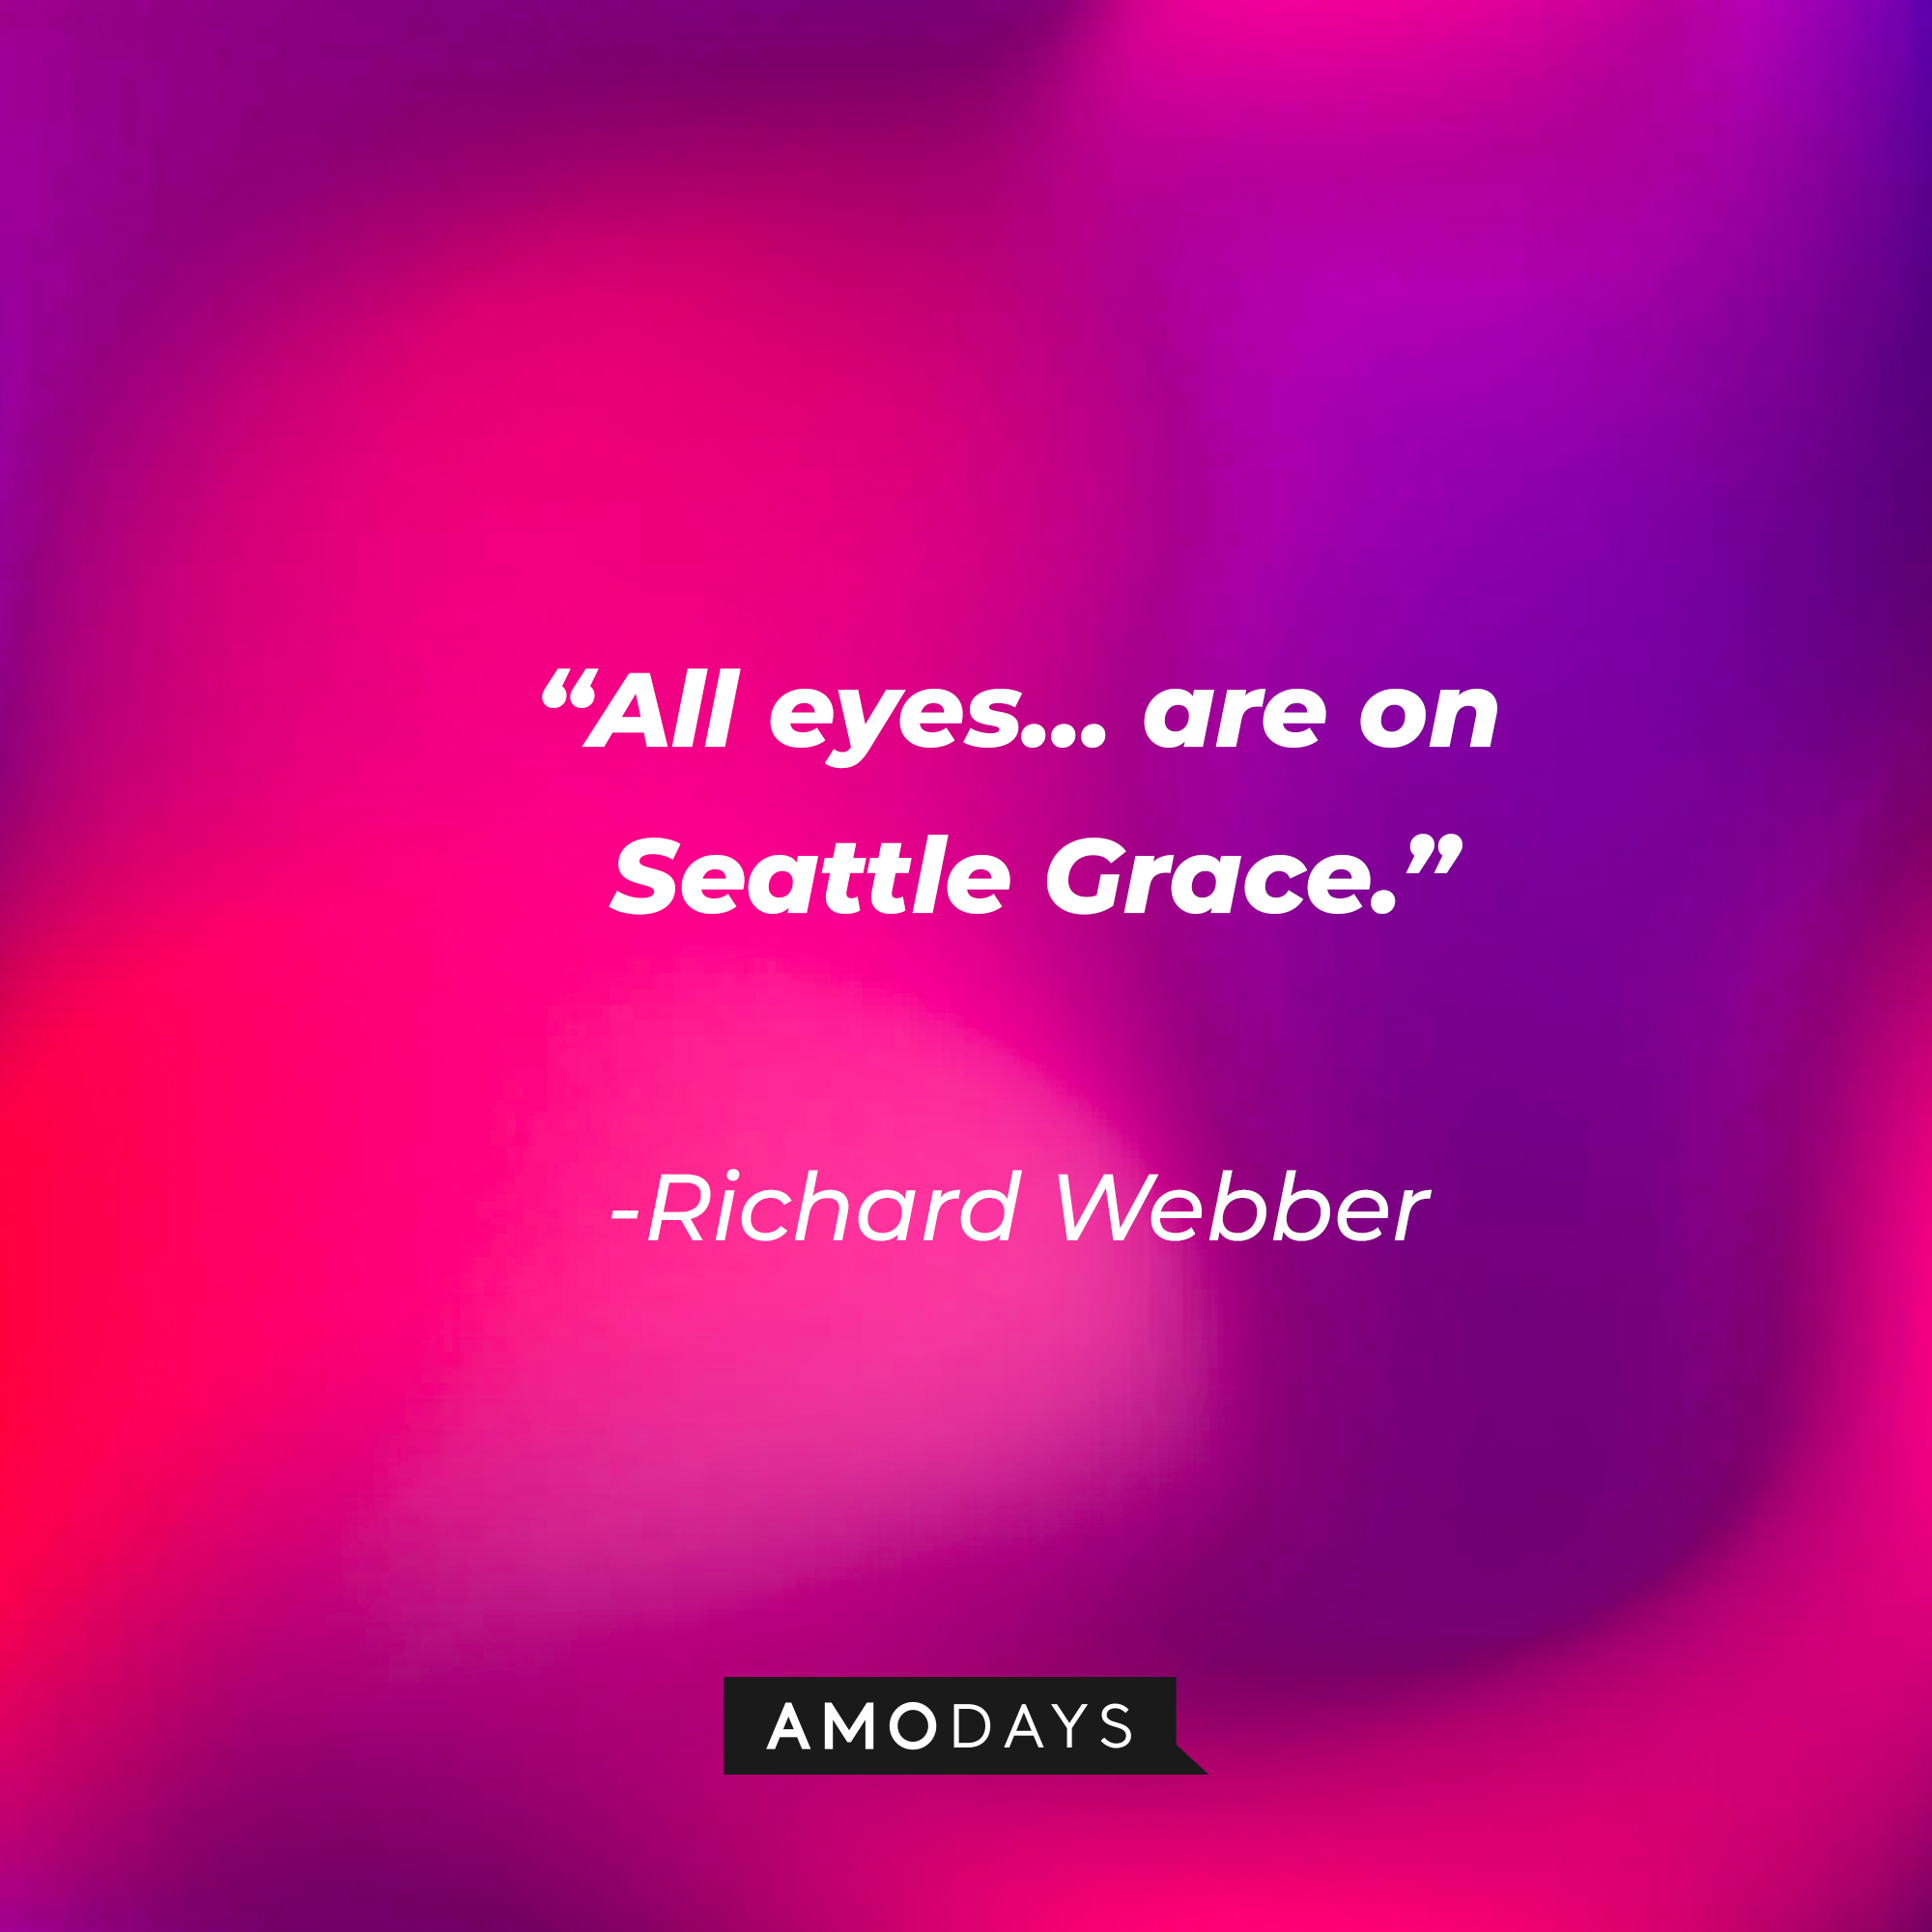 Richard Webber with his quote: "All eyes... are on Seattle Grace." | Source: Amodays